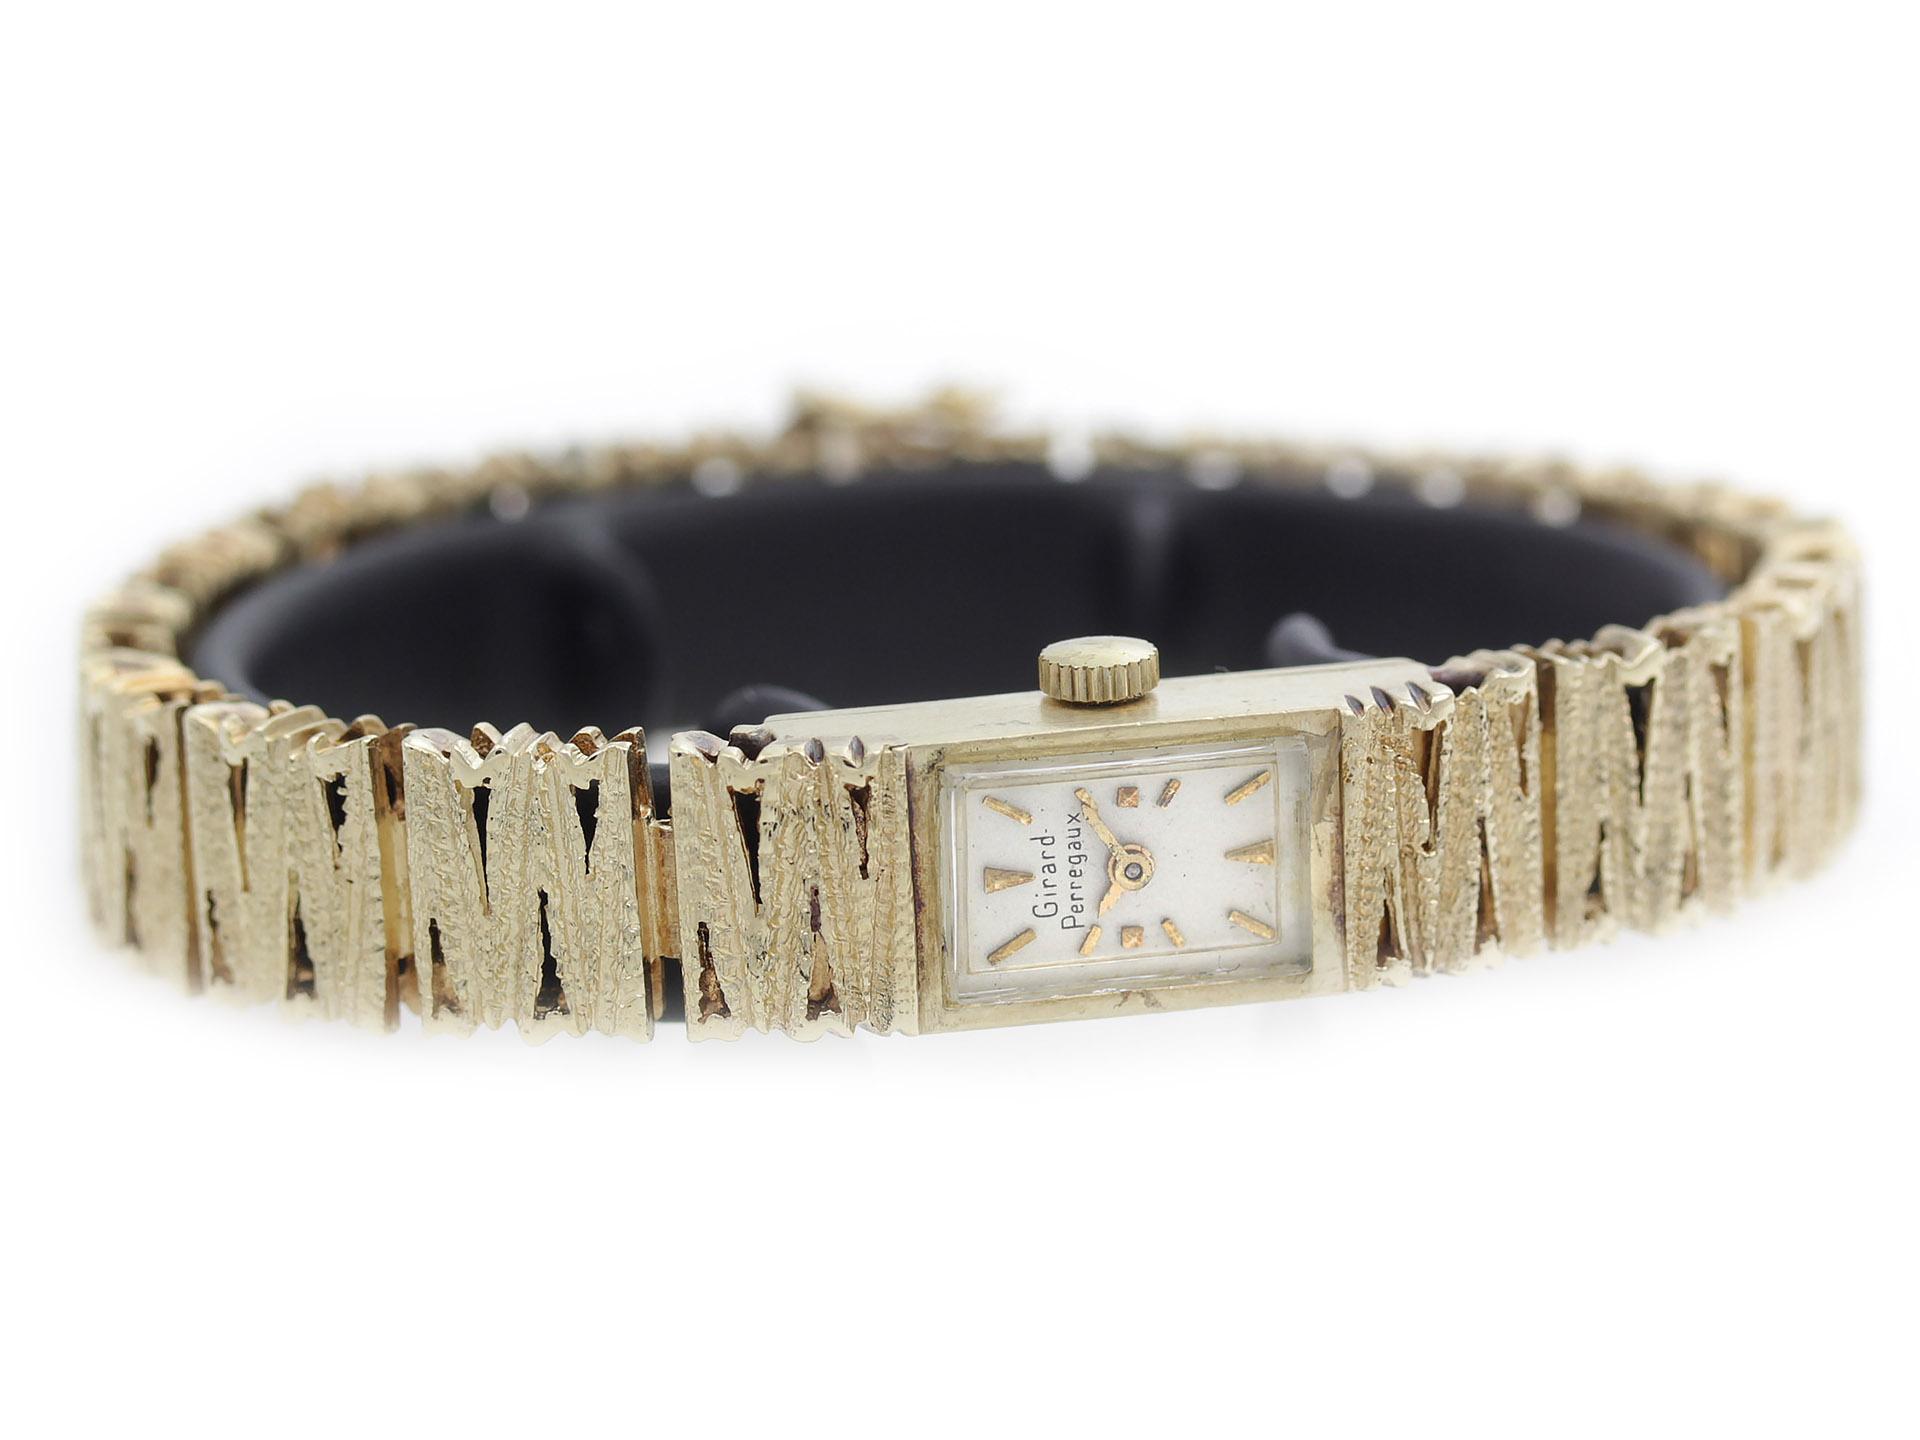 Girard Perregaux Vintage 14K watch, with solid 14K yellow gold case & jewelry bangle.

Watch	
Brand:	Girard Perregaux
Series:	Vintage 14K
Model #:	N/A
Gender:	Ladies
Condition:	Good Pre-owned, Discoloration to Gold, Scratches on Crystal, Not Water